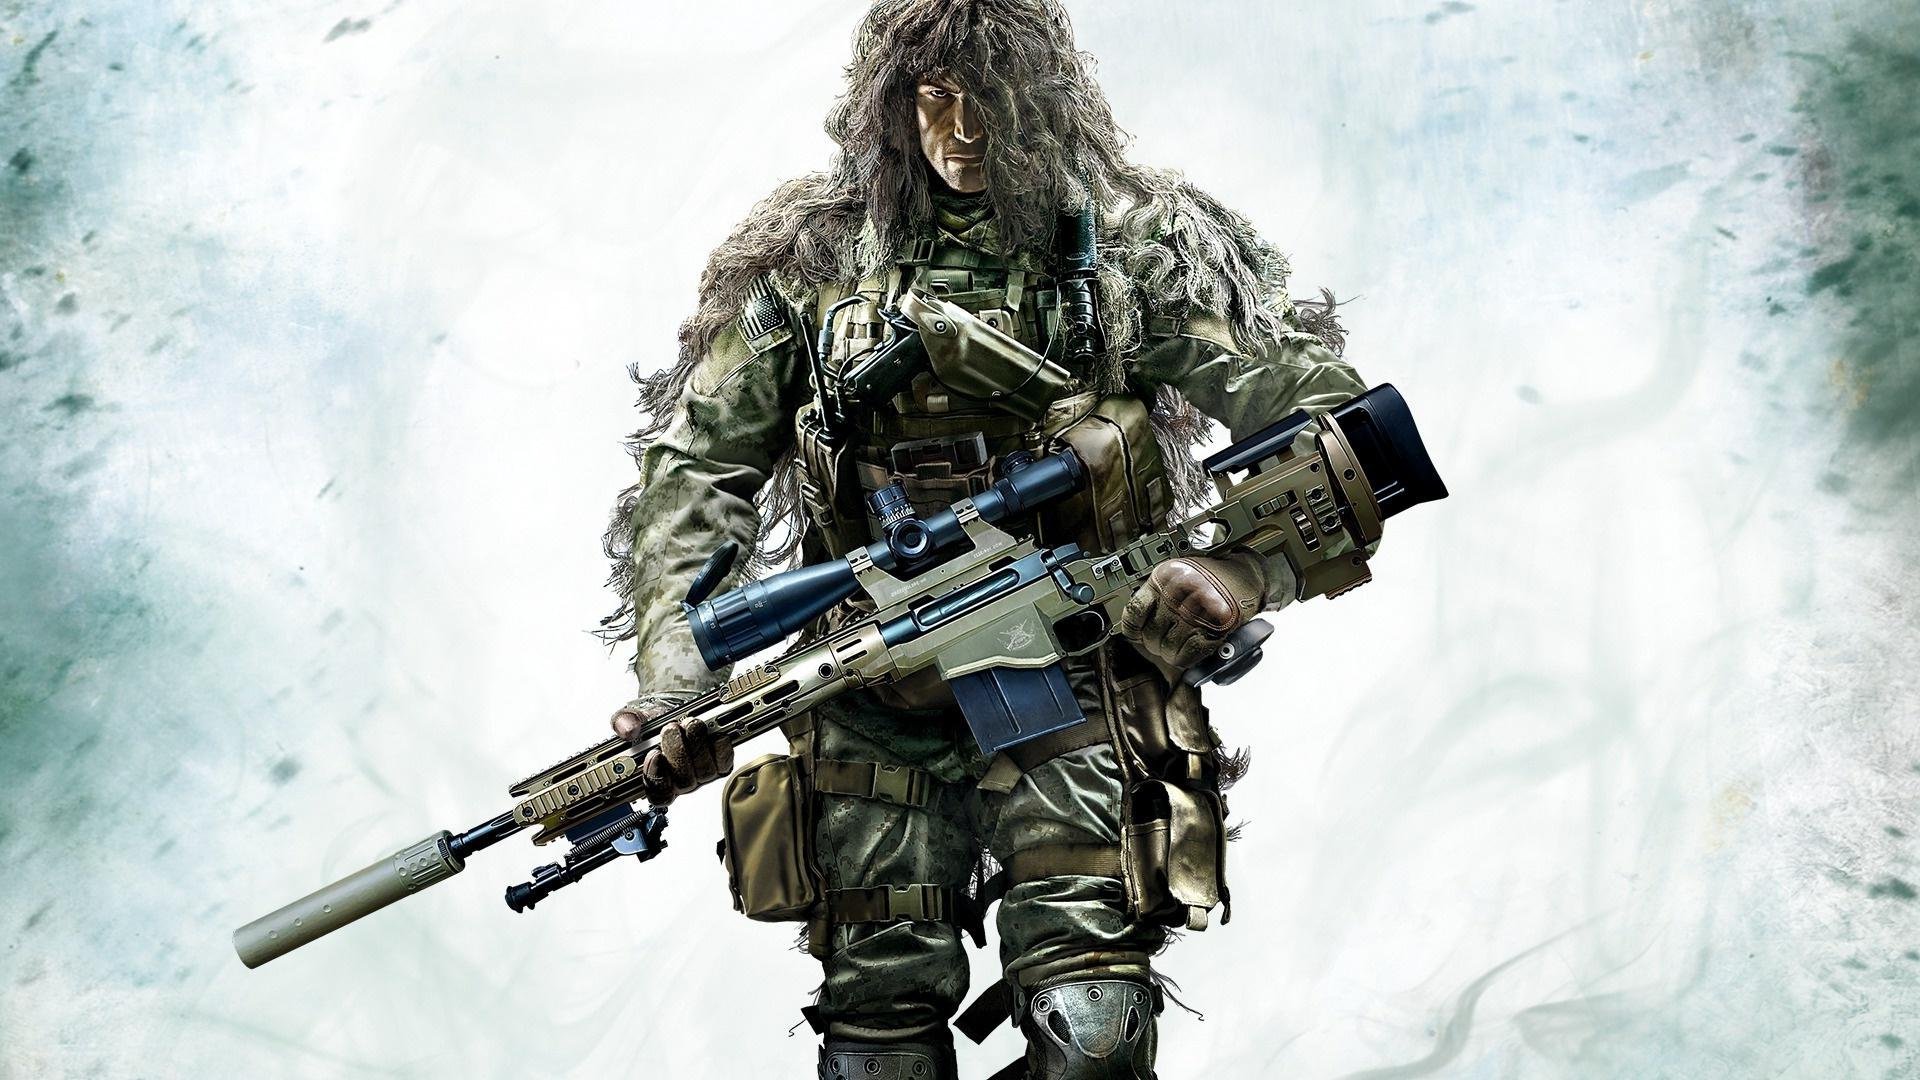 Sniper Wallpaper High Resolution Image collections ...